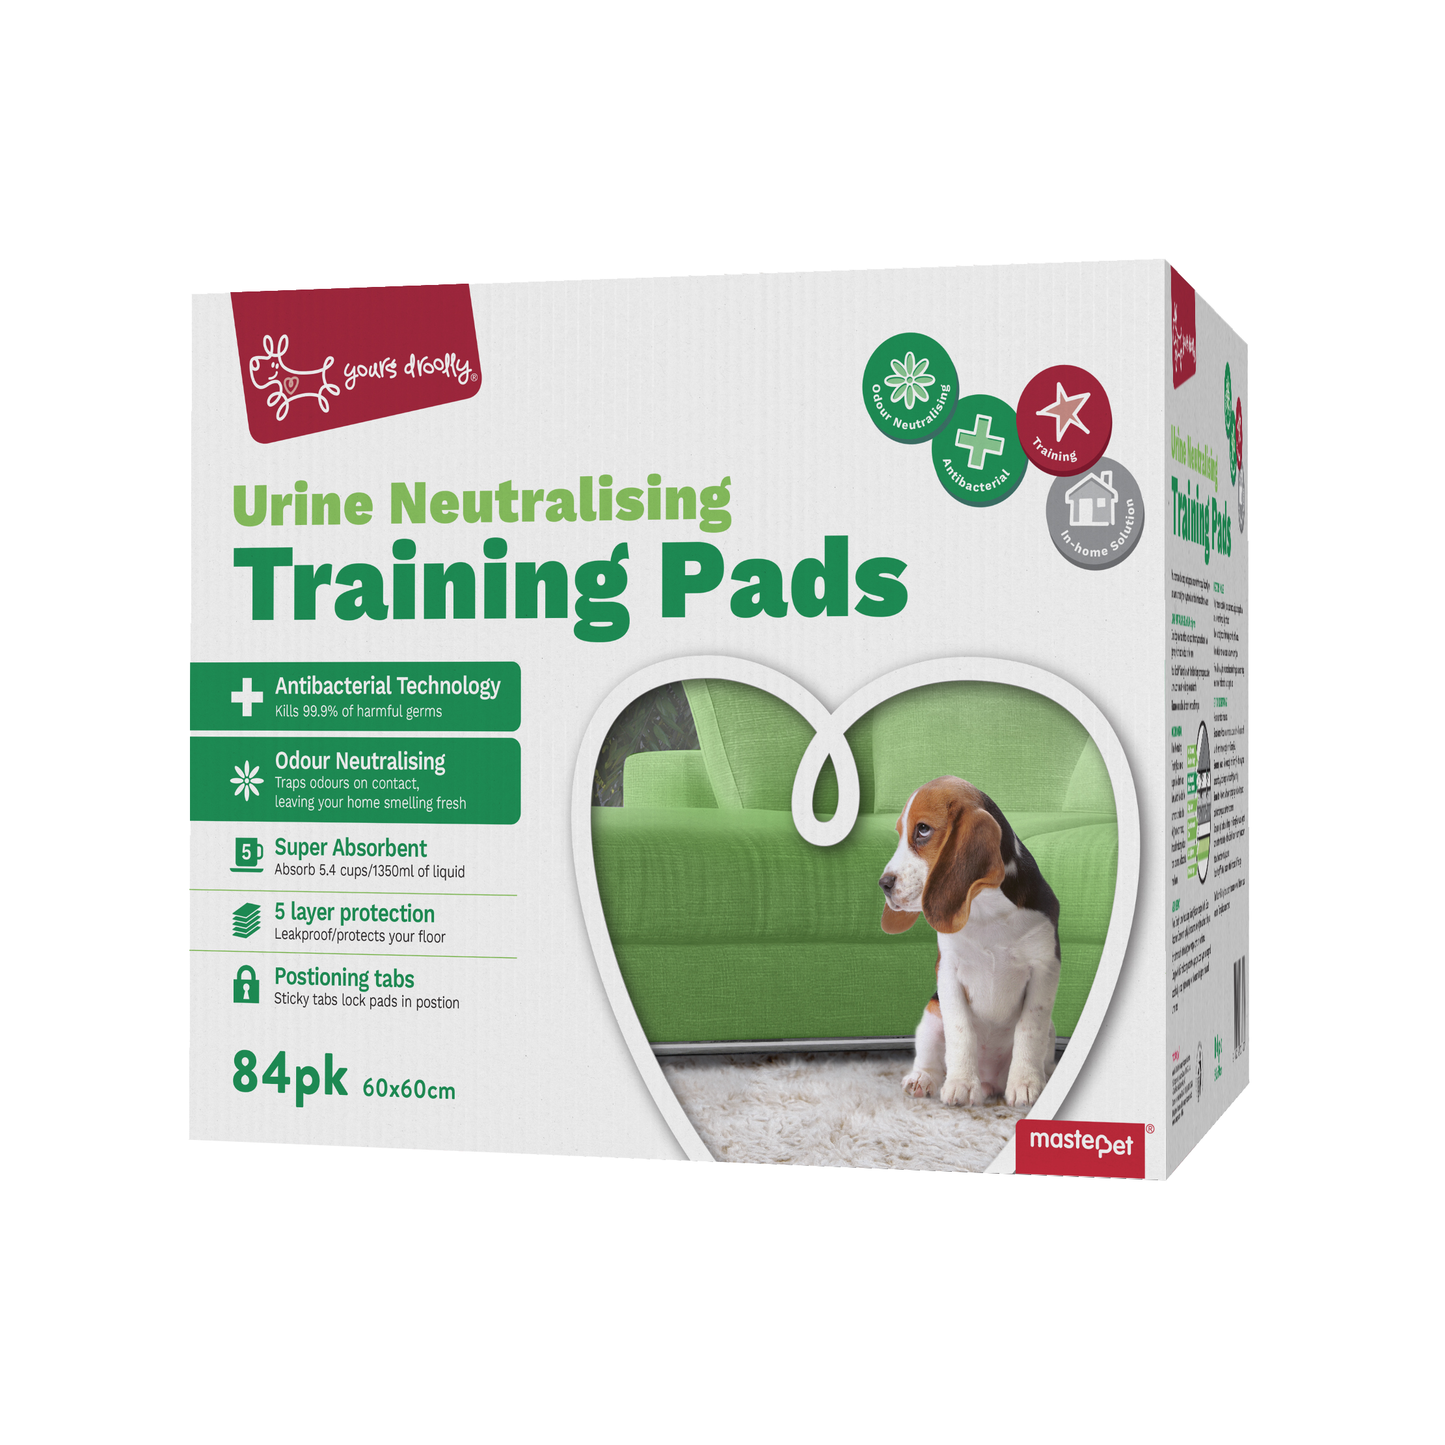 Yours Droolly Urine Neutralising Puppy Training Pads